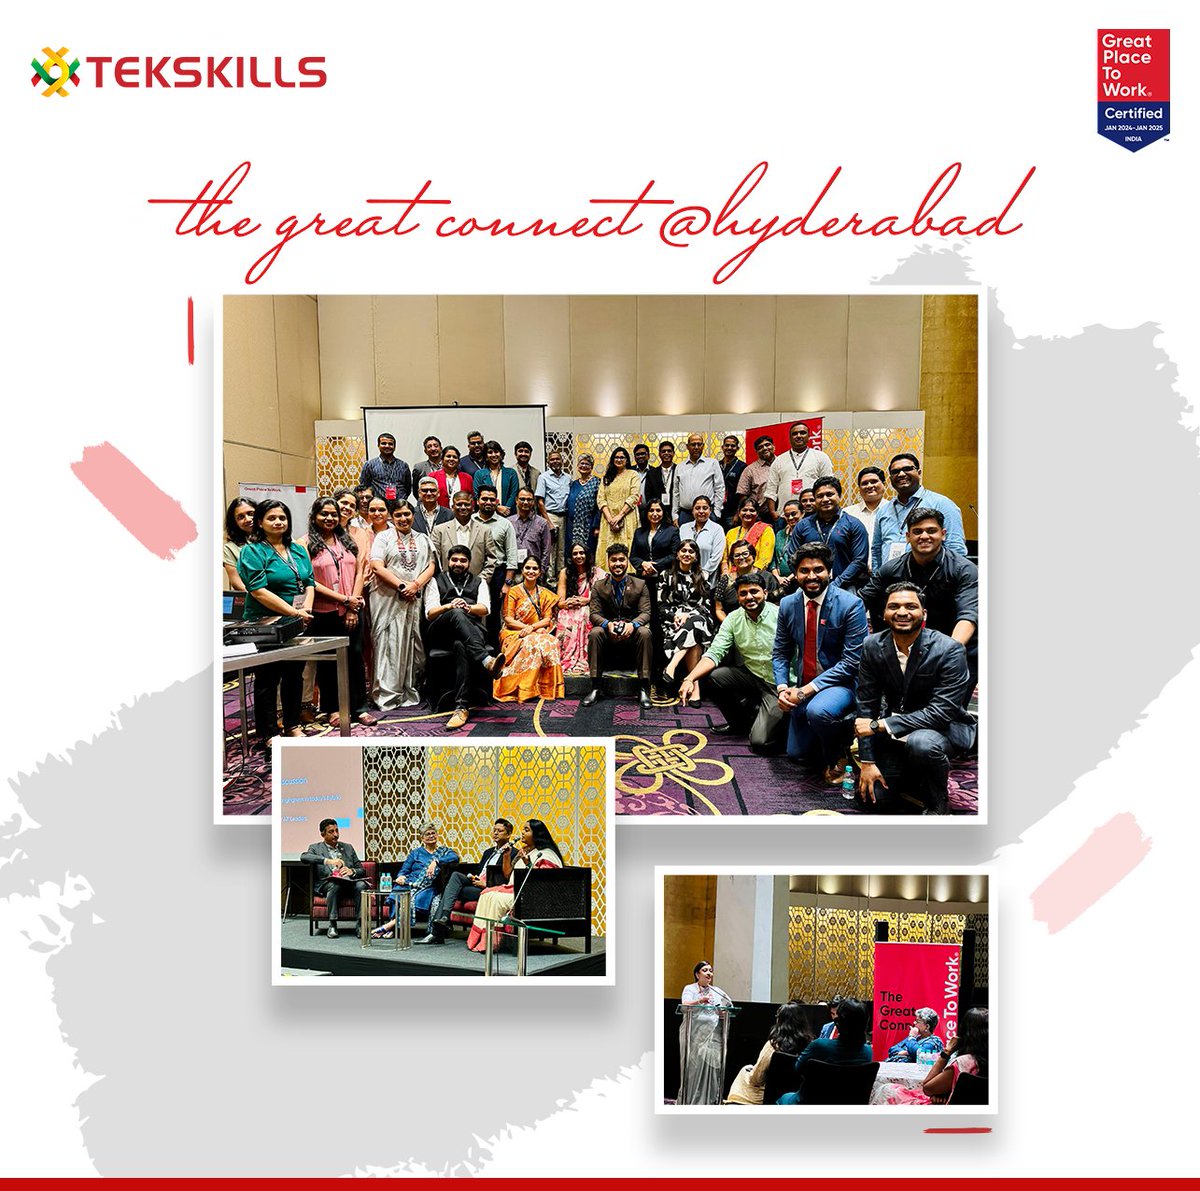 We were glad to participate in the esteemed #TheGreatConnect at Hyderabad. This engaging event offered invaluable insights through interactive sessions, making it an exceptional experience for all involved.

#GPTW4ALL #MakingIndiaAGreatPlaceToWorkForAll #TeamTekskills